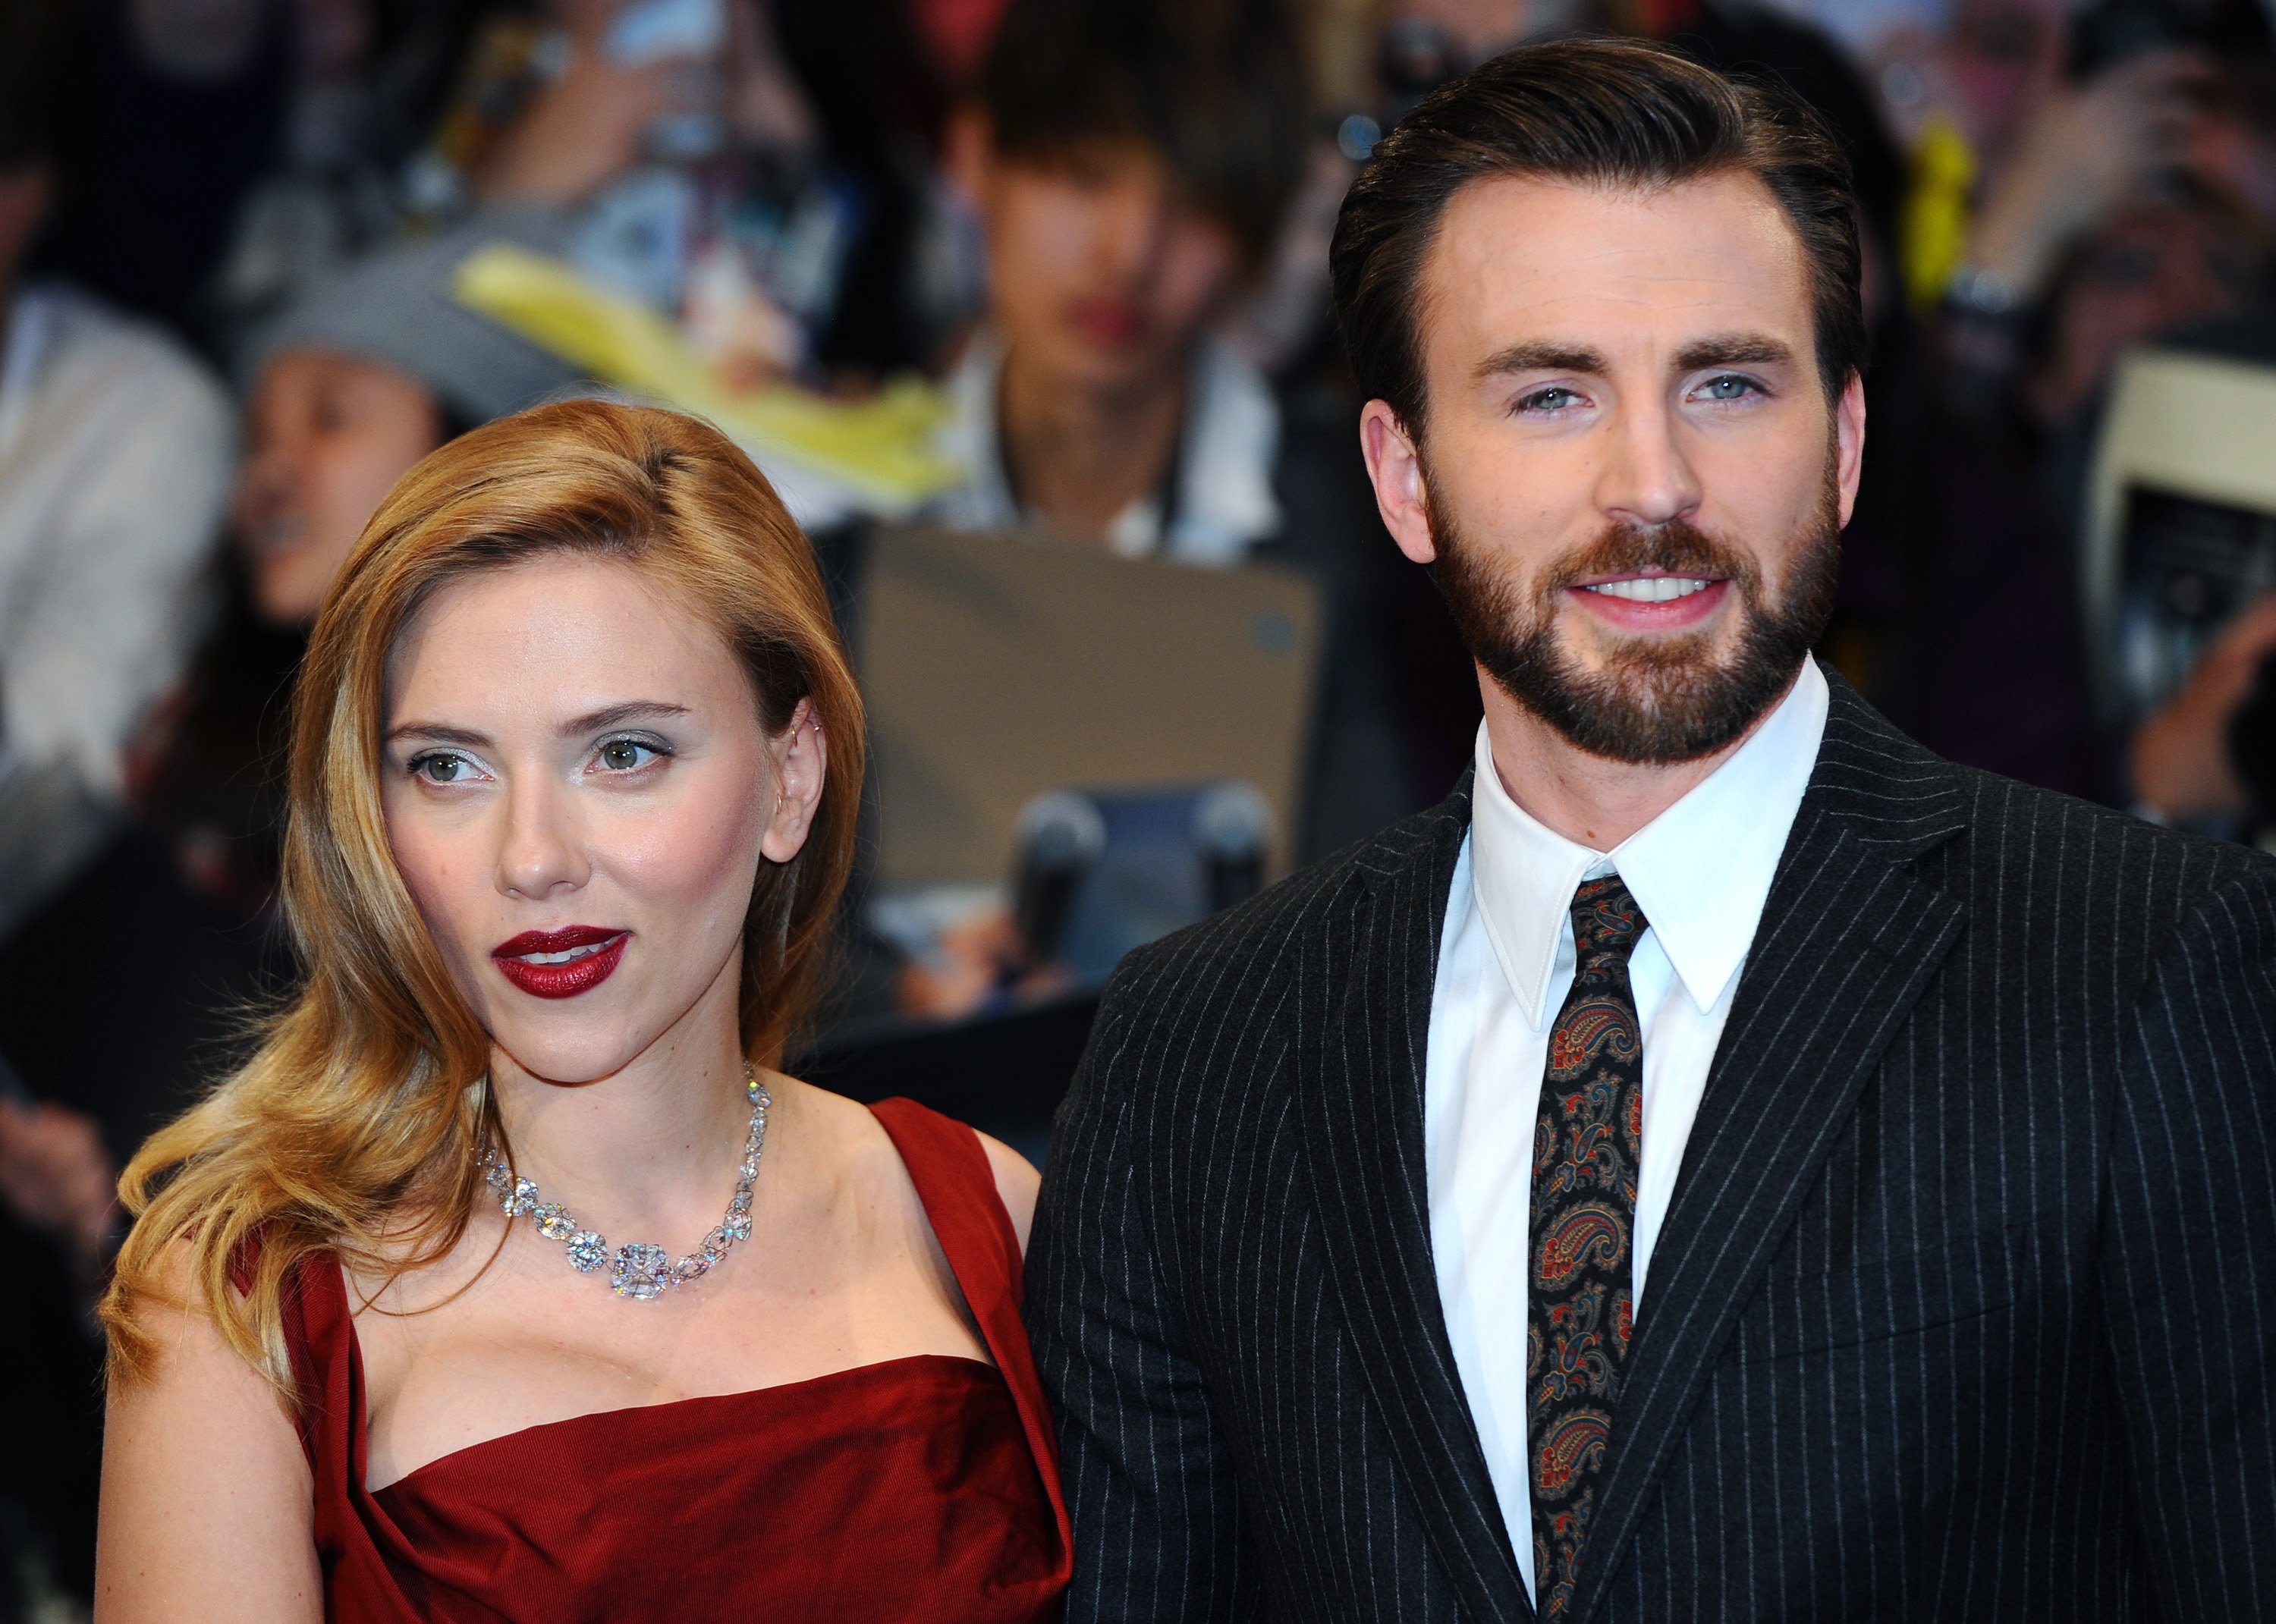 Scarlett Johansson and Chris Evans attend the UK Film Premiere of 'Captain America: The Winter Soldier' on March 20, 2014 in London, England.